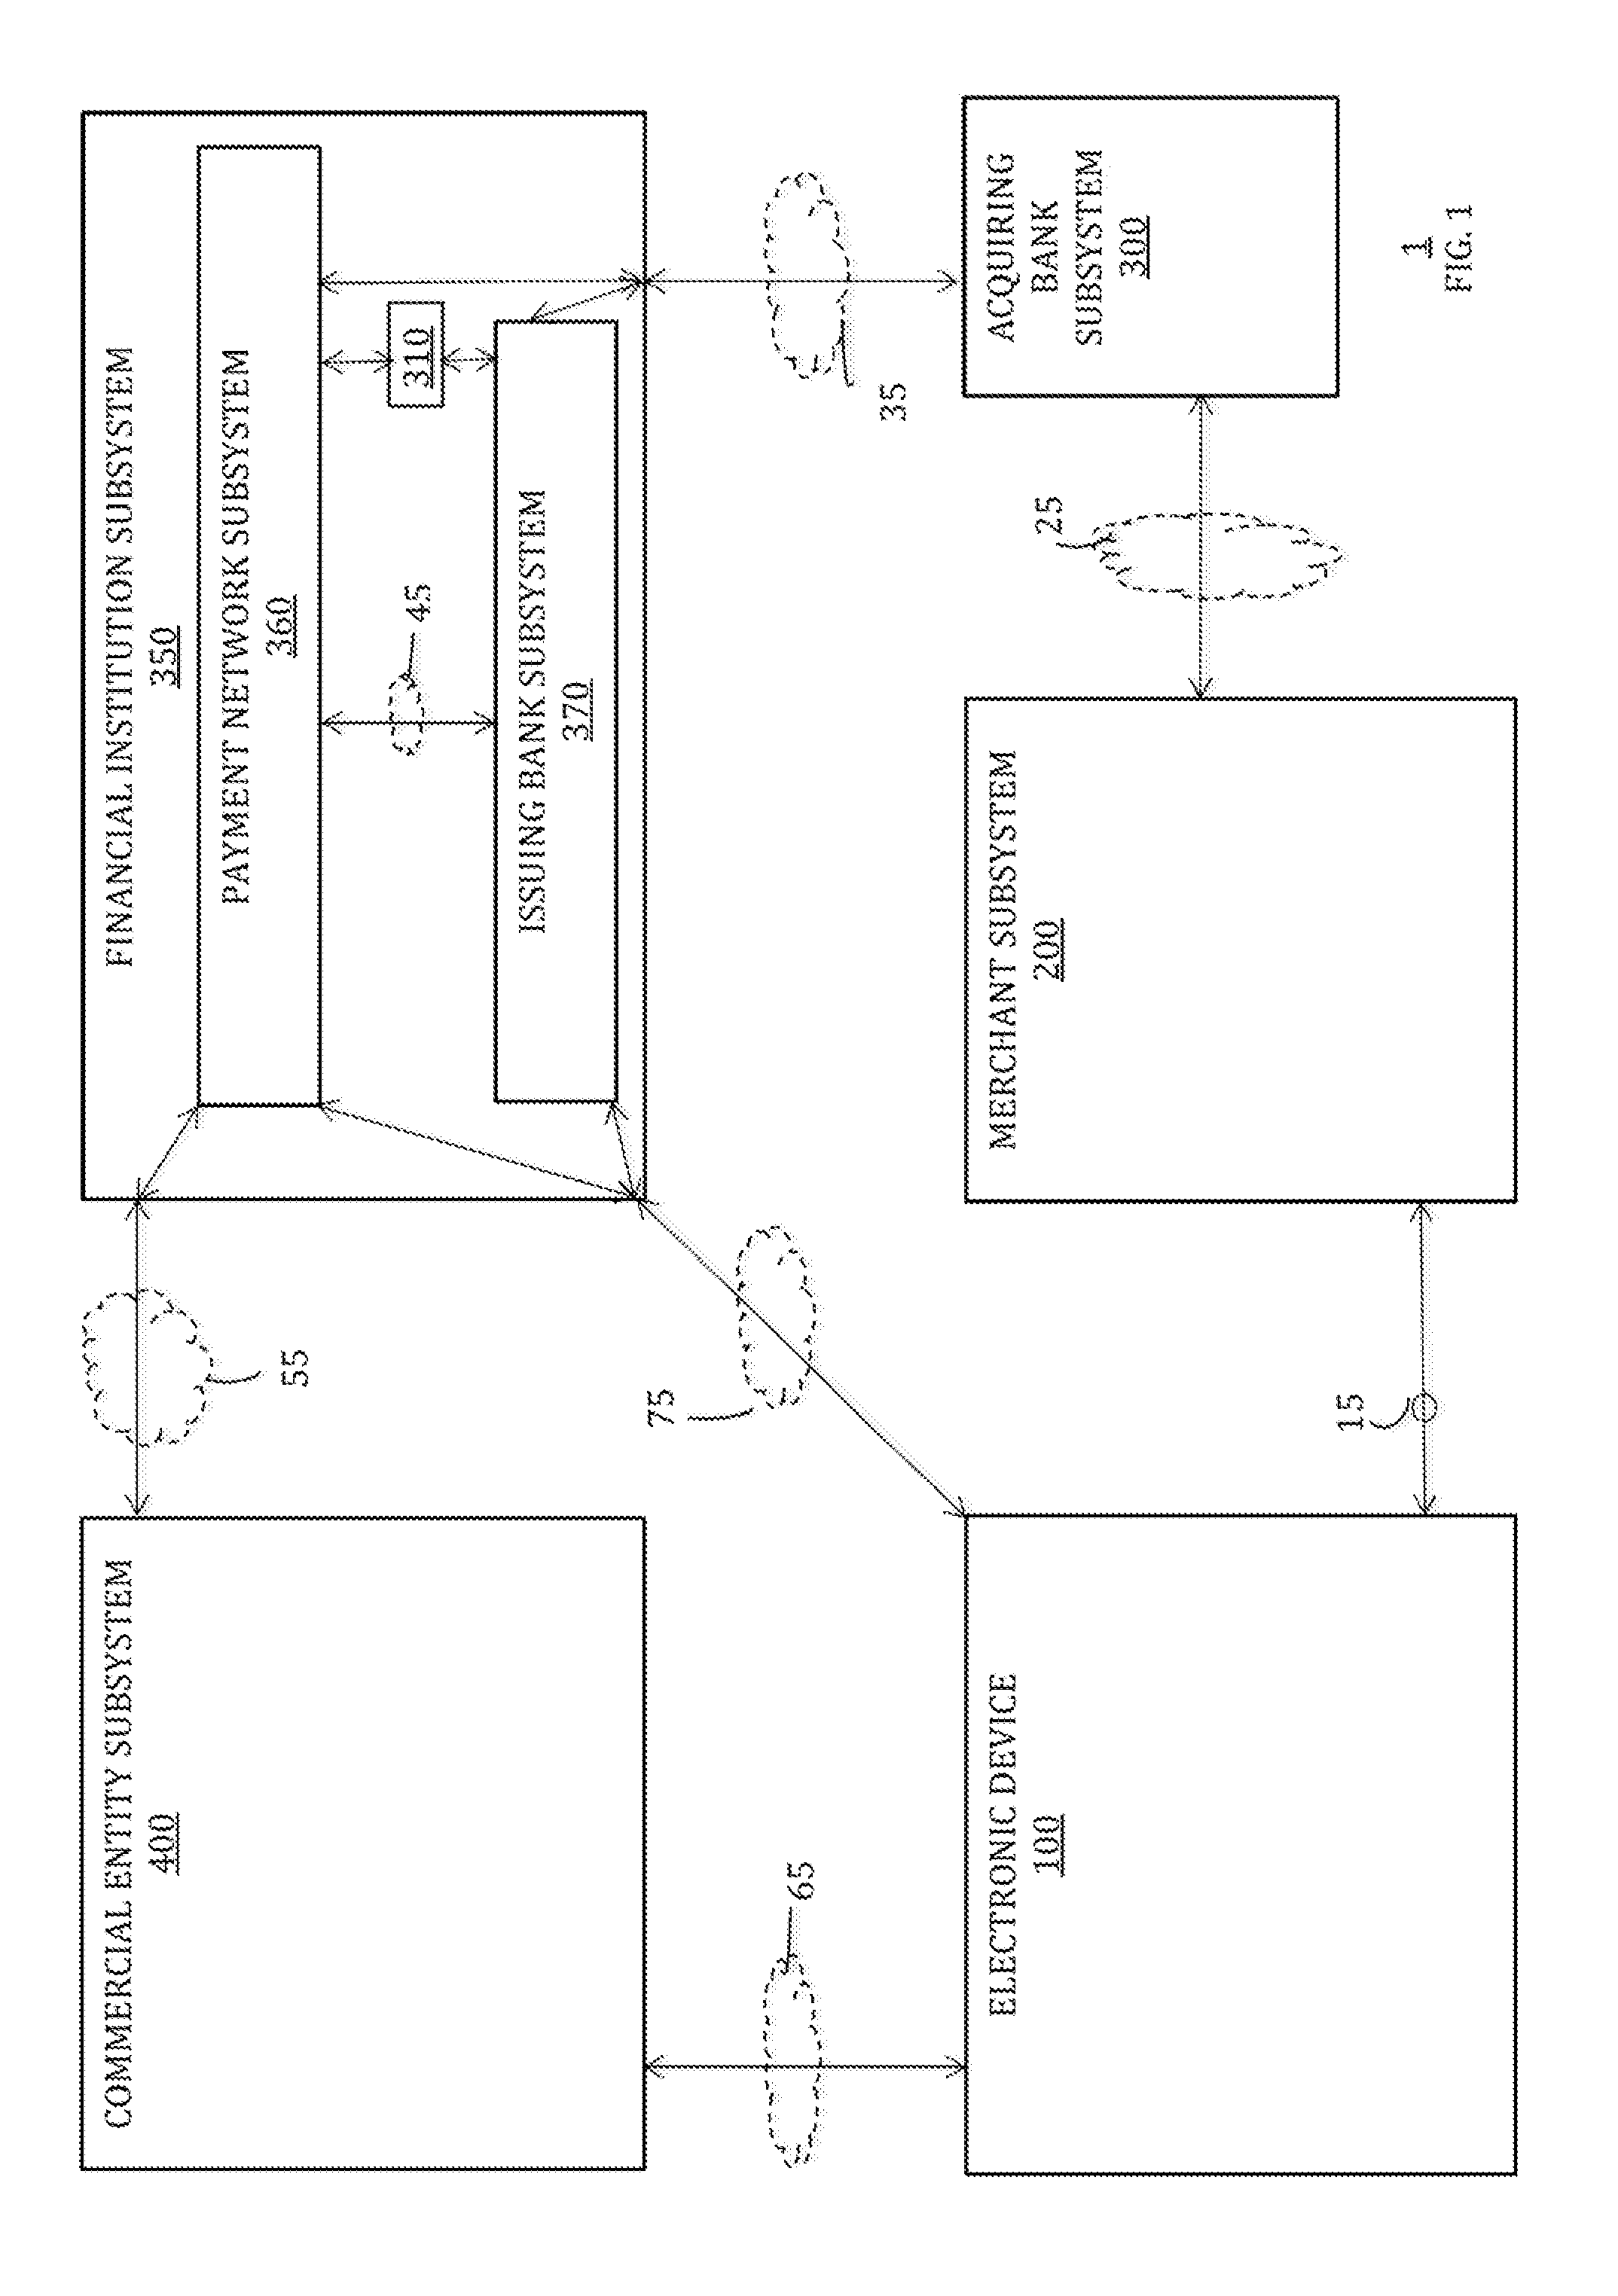 Management of reloadable credentials on an electronic device using an online resource